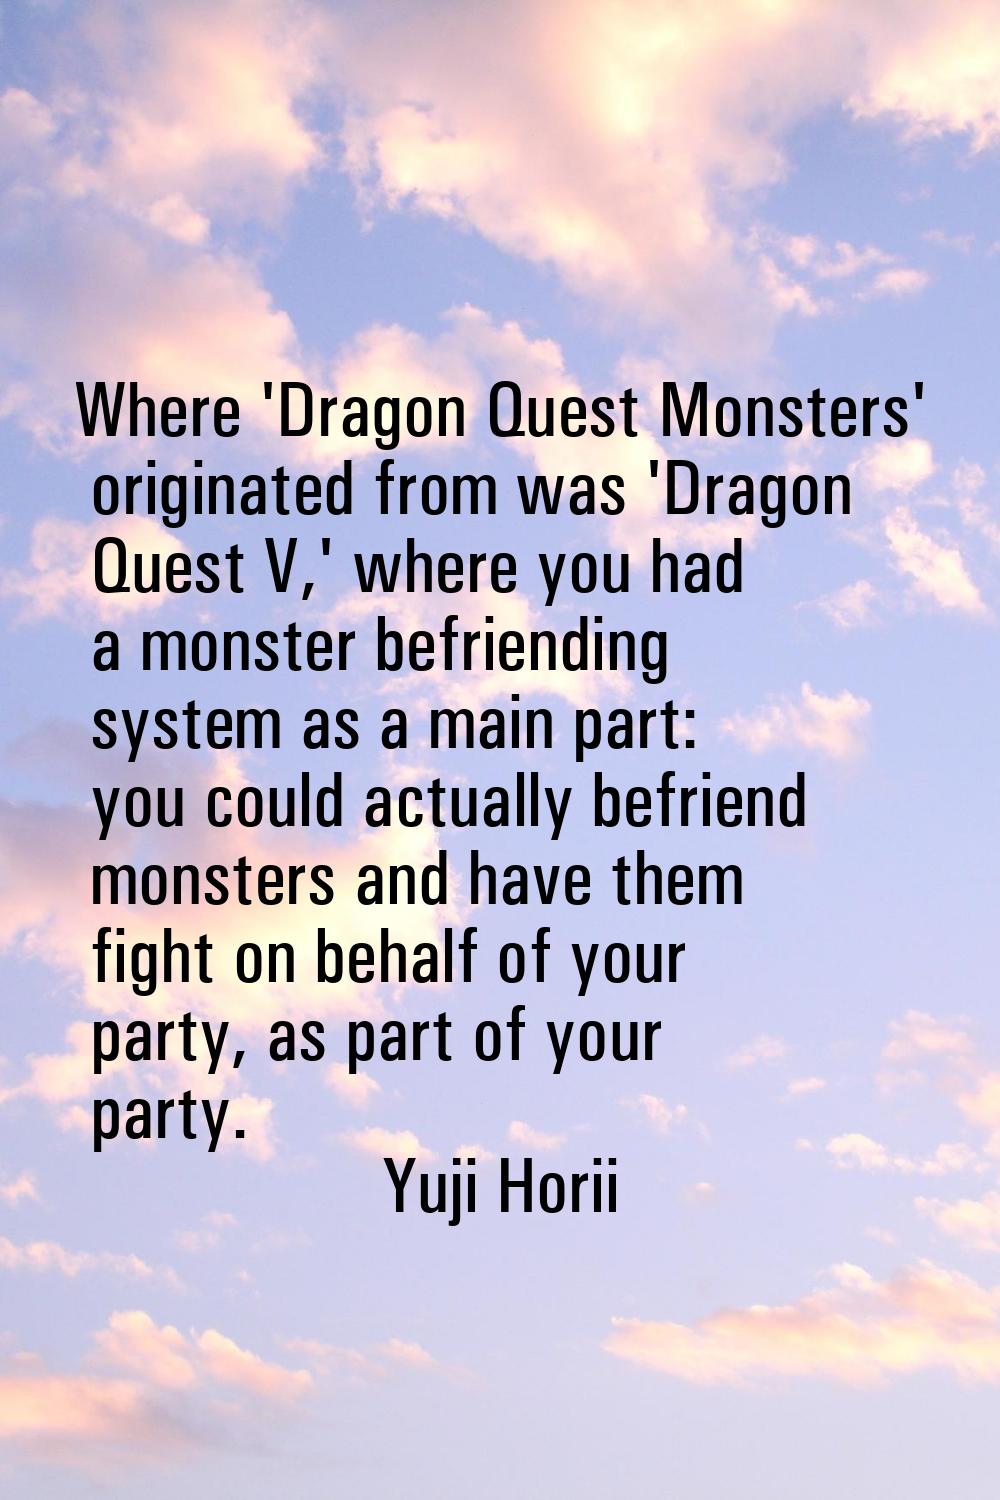 Where 'Dragon Quest Monsters' originated from was 'Dragon Quest V,' where you had a monster befrien